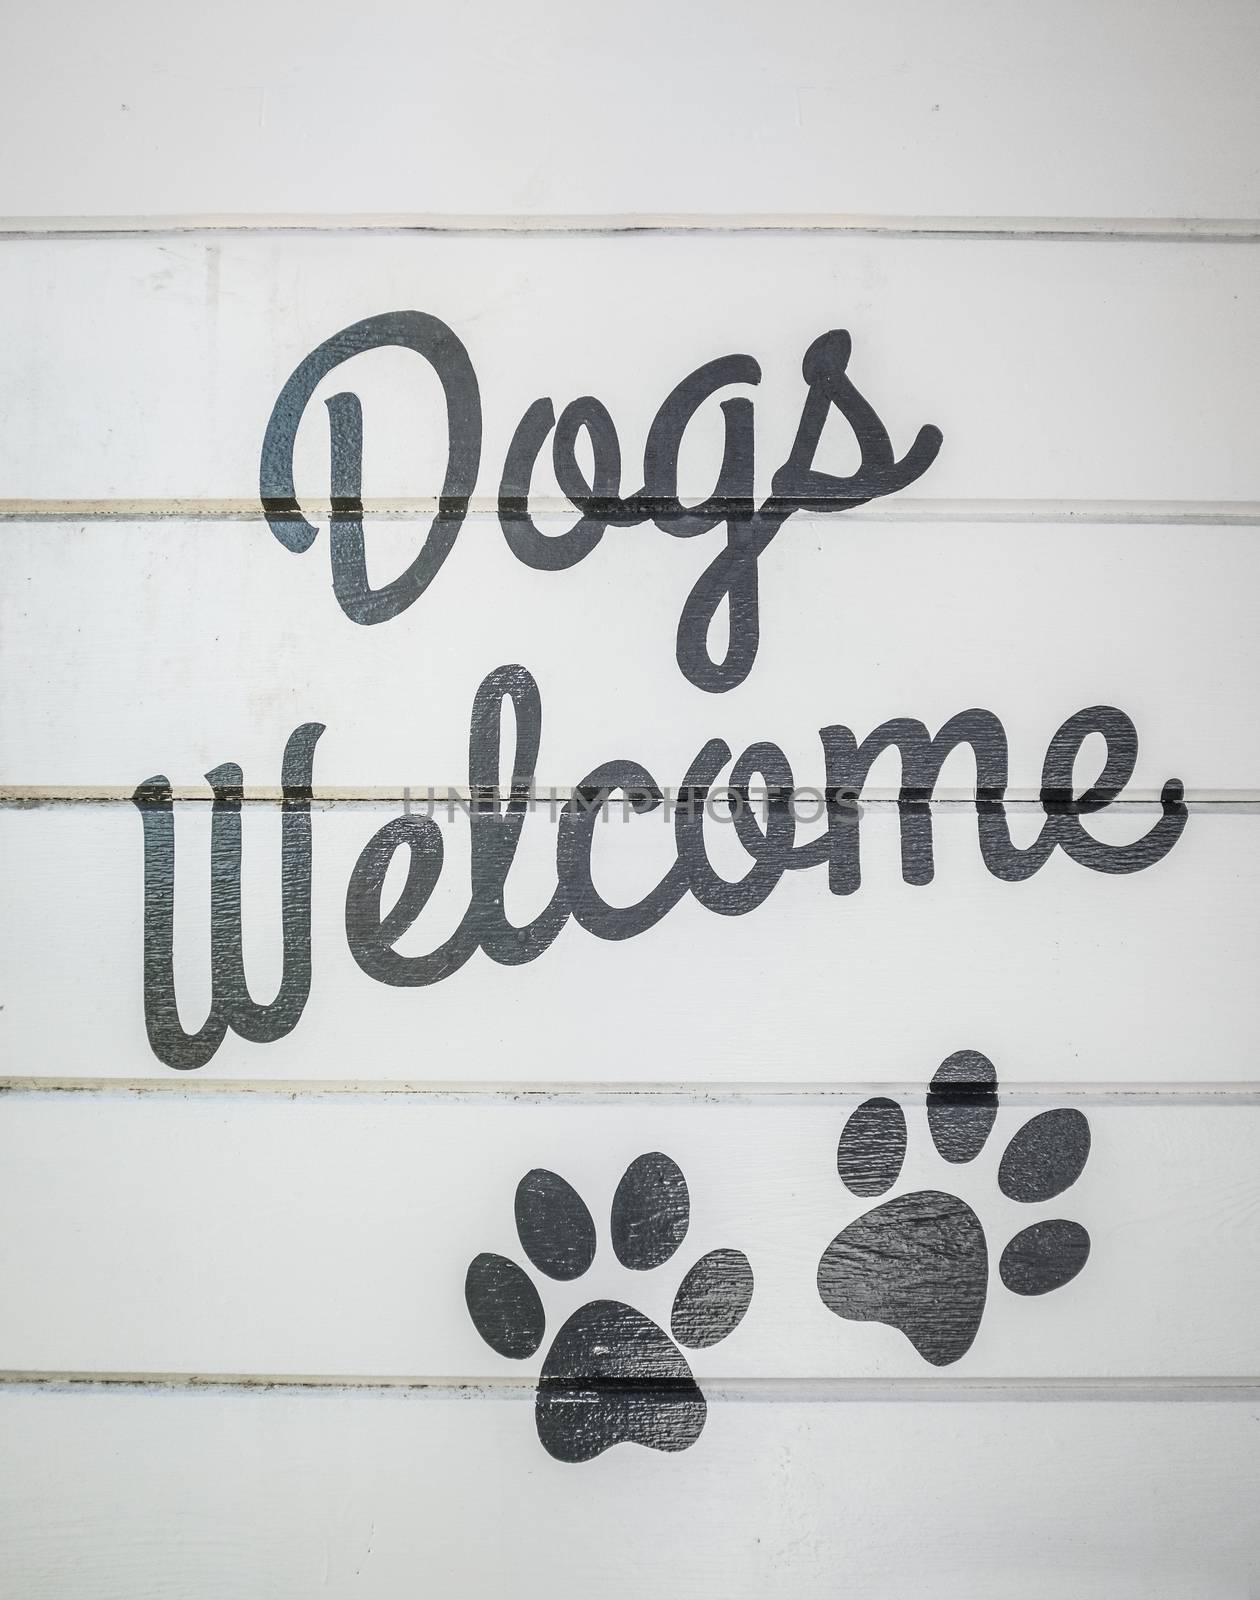 Retro Vintage Style Dogs Welcome Sign On A Wooden Wall Of A Cafe Or Restaurant Or Hotel